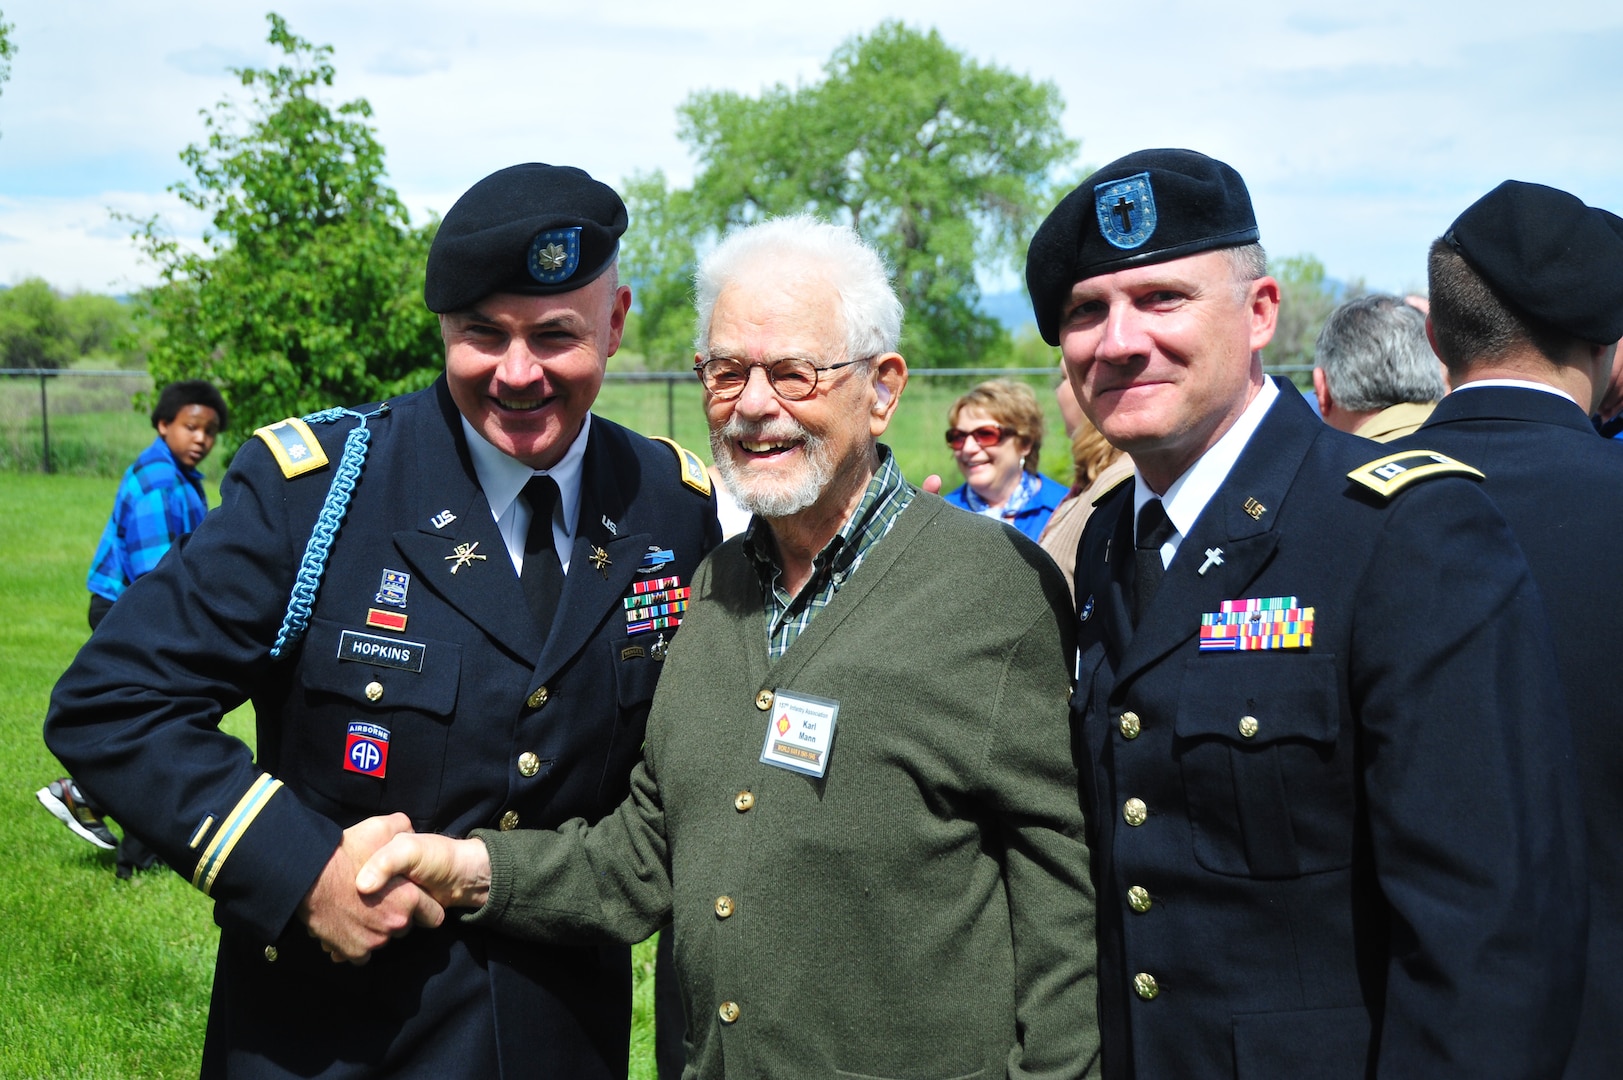 Memorial ceremony for Brig. Gen. Felix Sparks at Crown Hill Cemetery Wheat Ridge, Colorado, as part of the final reunion of the 157th Infantry Regimental Association, including 1/157th Infantry Veterans from World War II and their families, hosted by member of the 1st Battalion 157th Infantry, Colorado Army National Guard, May 31, 2015. (U.S. Army National Guard photo by 1st Lt. Skye Robinson/Released)